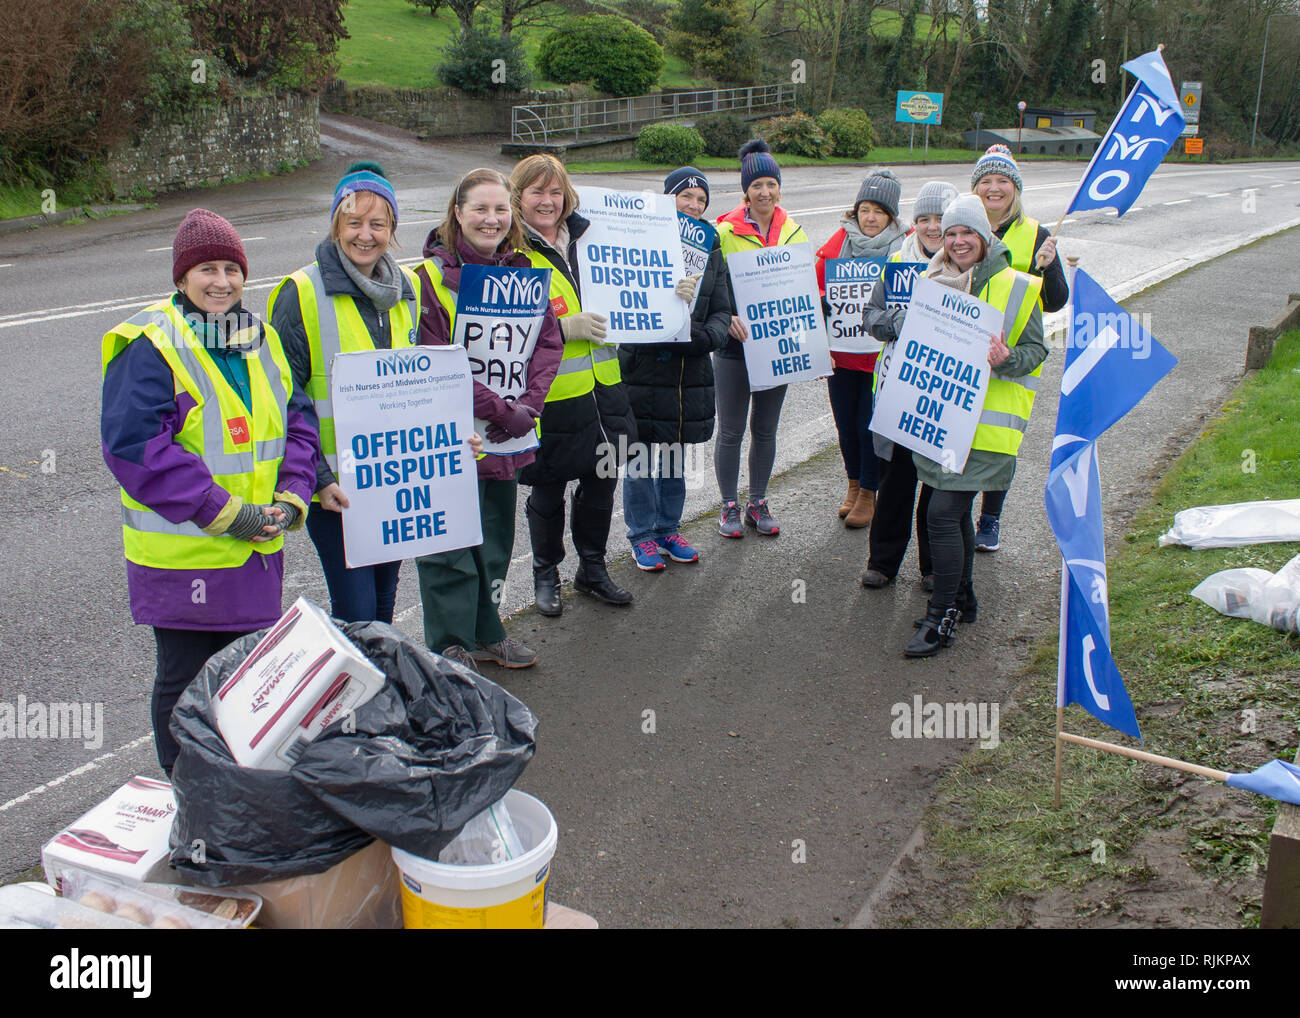 Irish nurses taking industrial action on a picket line over pay claim Stock Photo